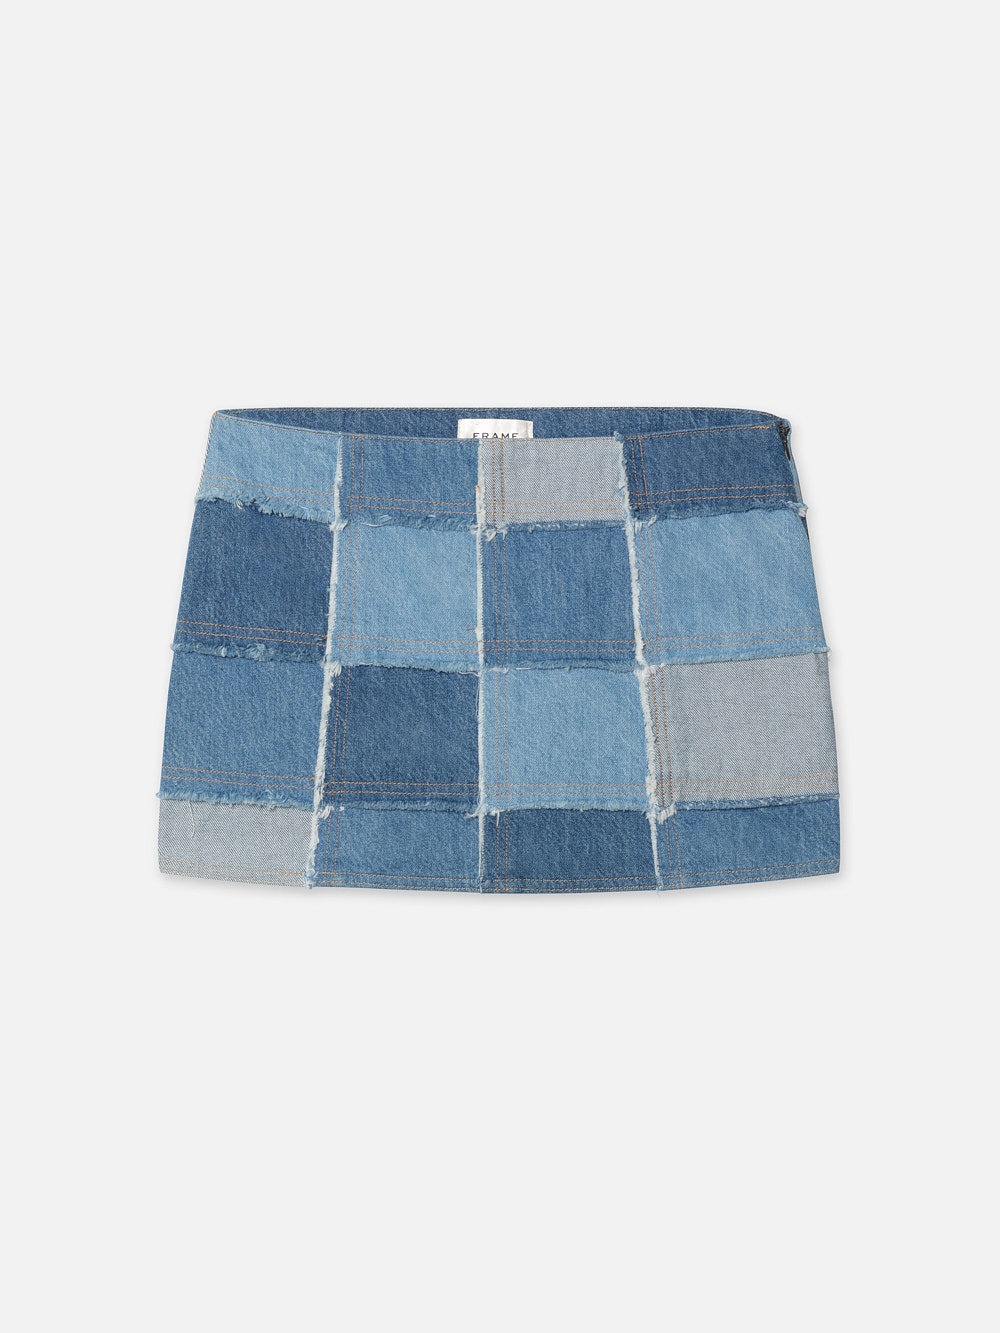 The 70's Patchwork Mini Skirt in Road Trip - 1